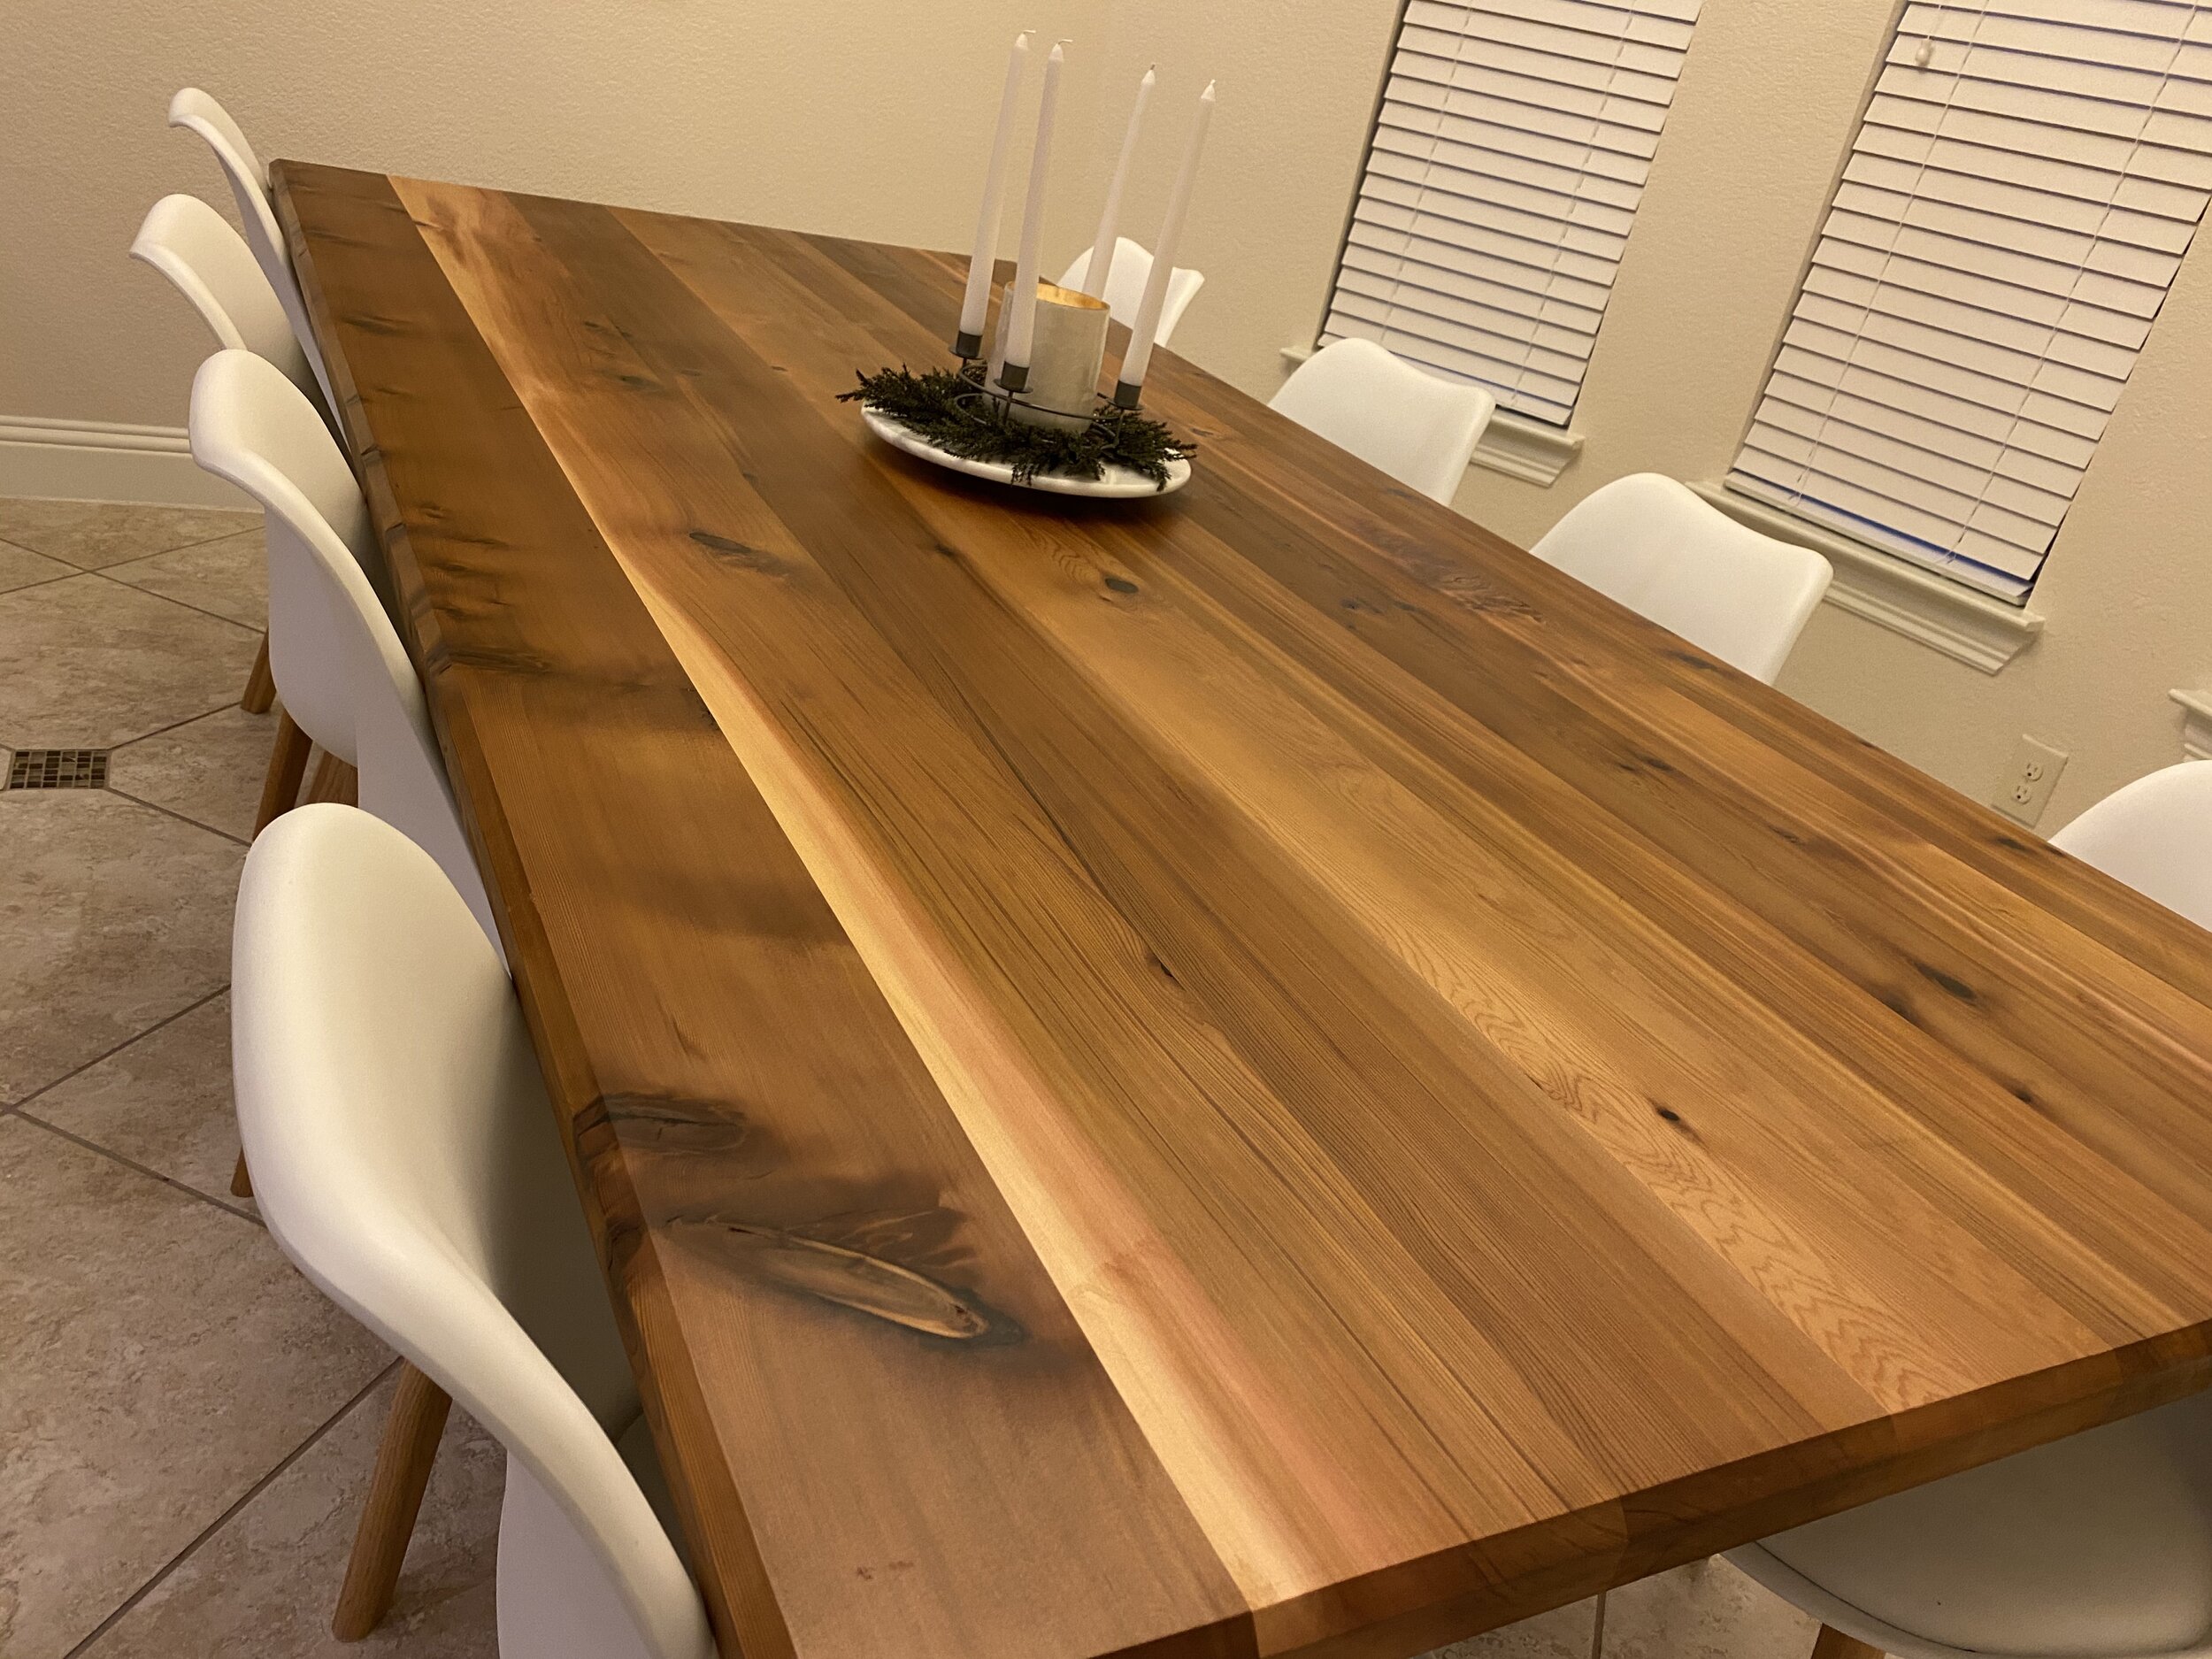 Dr. Swapp's Dining Room Table